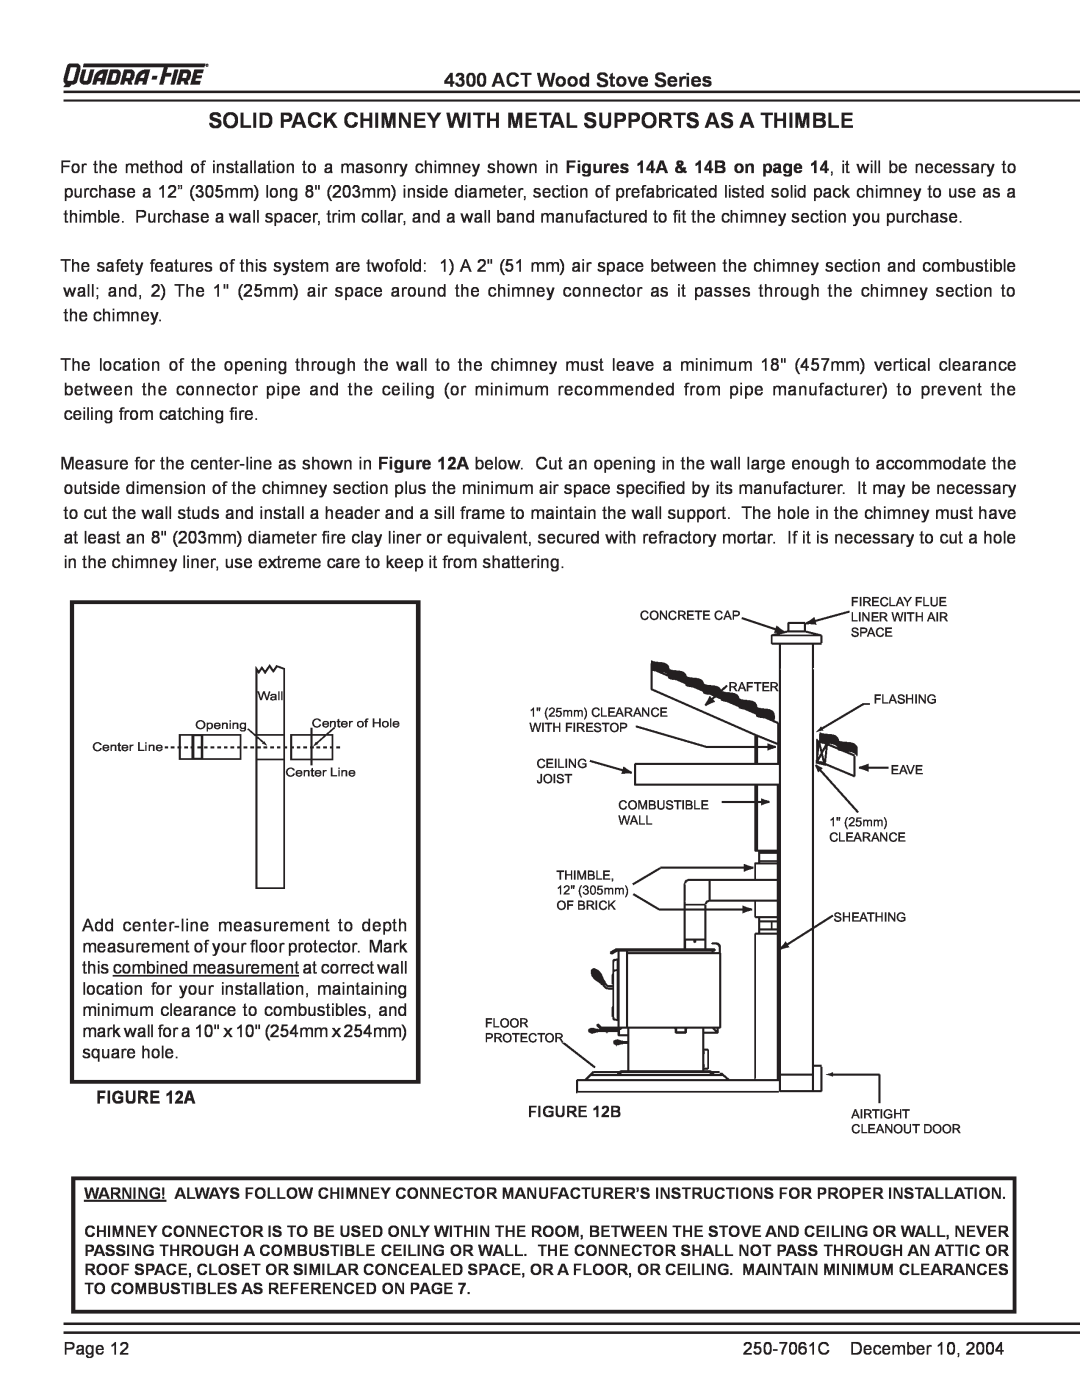 Quadra-Fire 4300 WOOD STOVE SERIES installation instructions ACT Wood Stove Series 